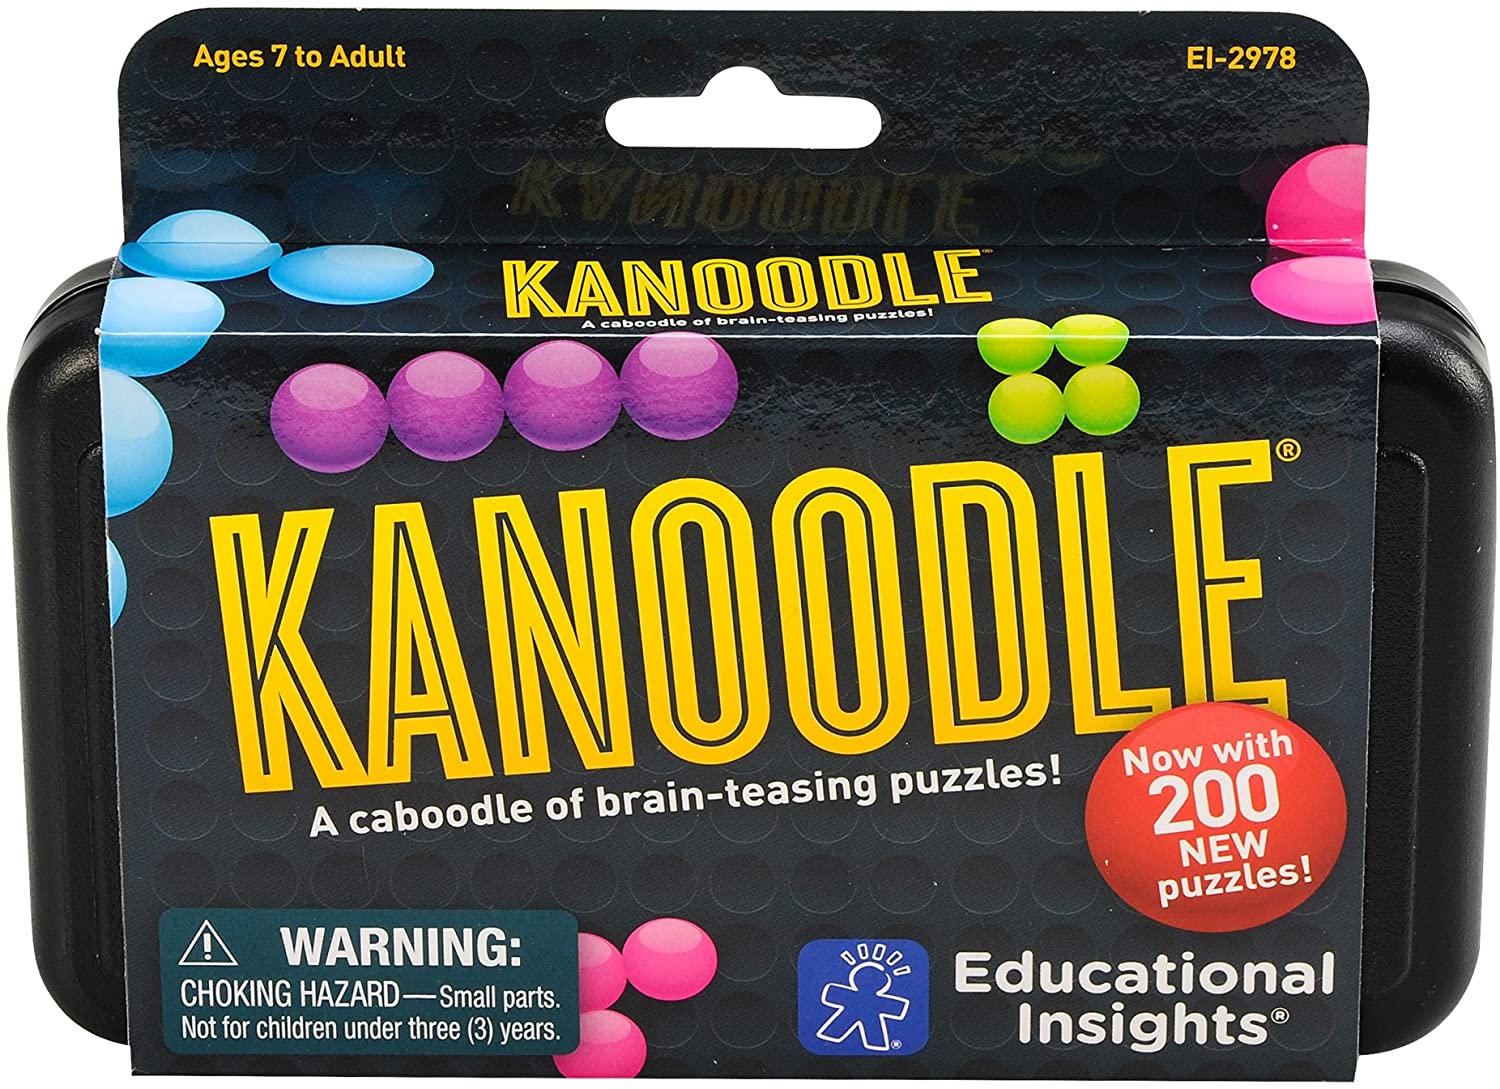 Kanoodle - Over the Rainbow